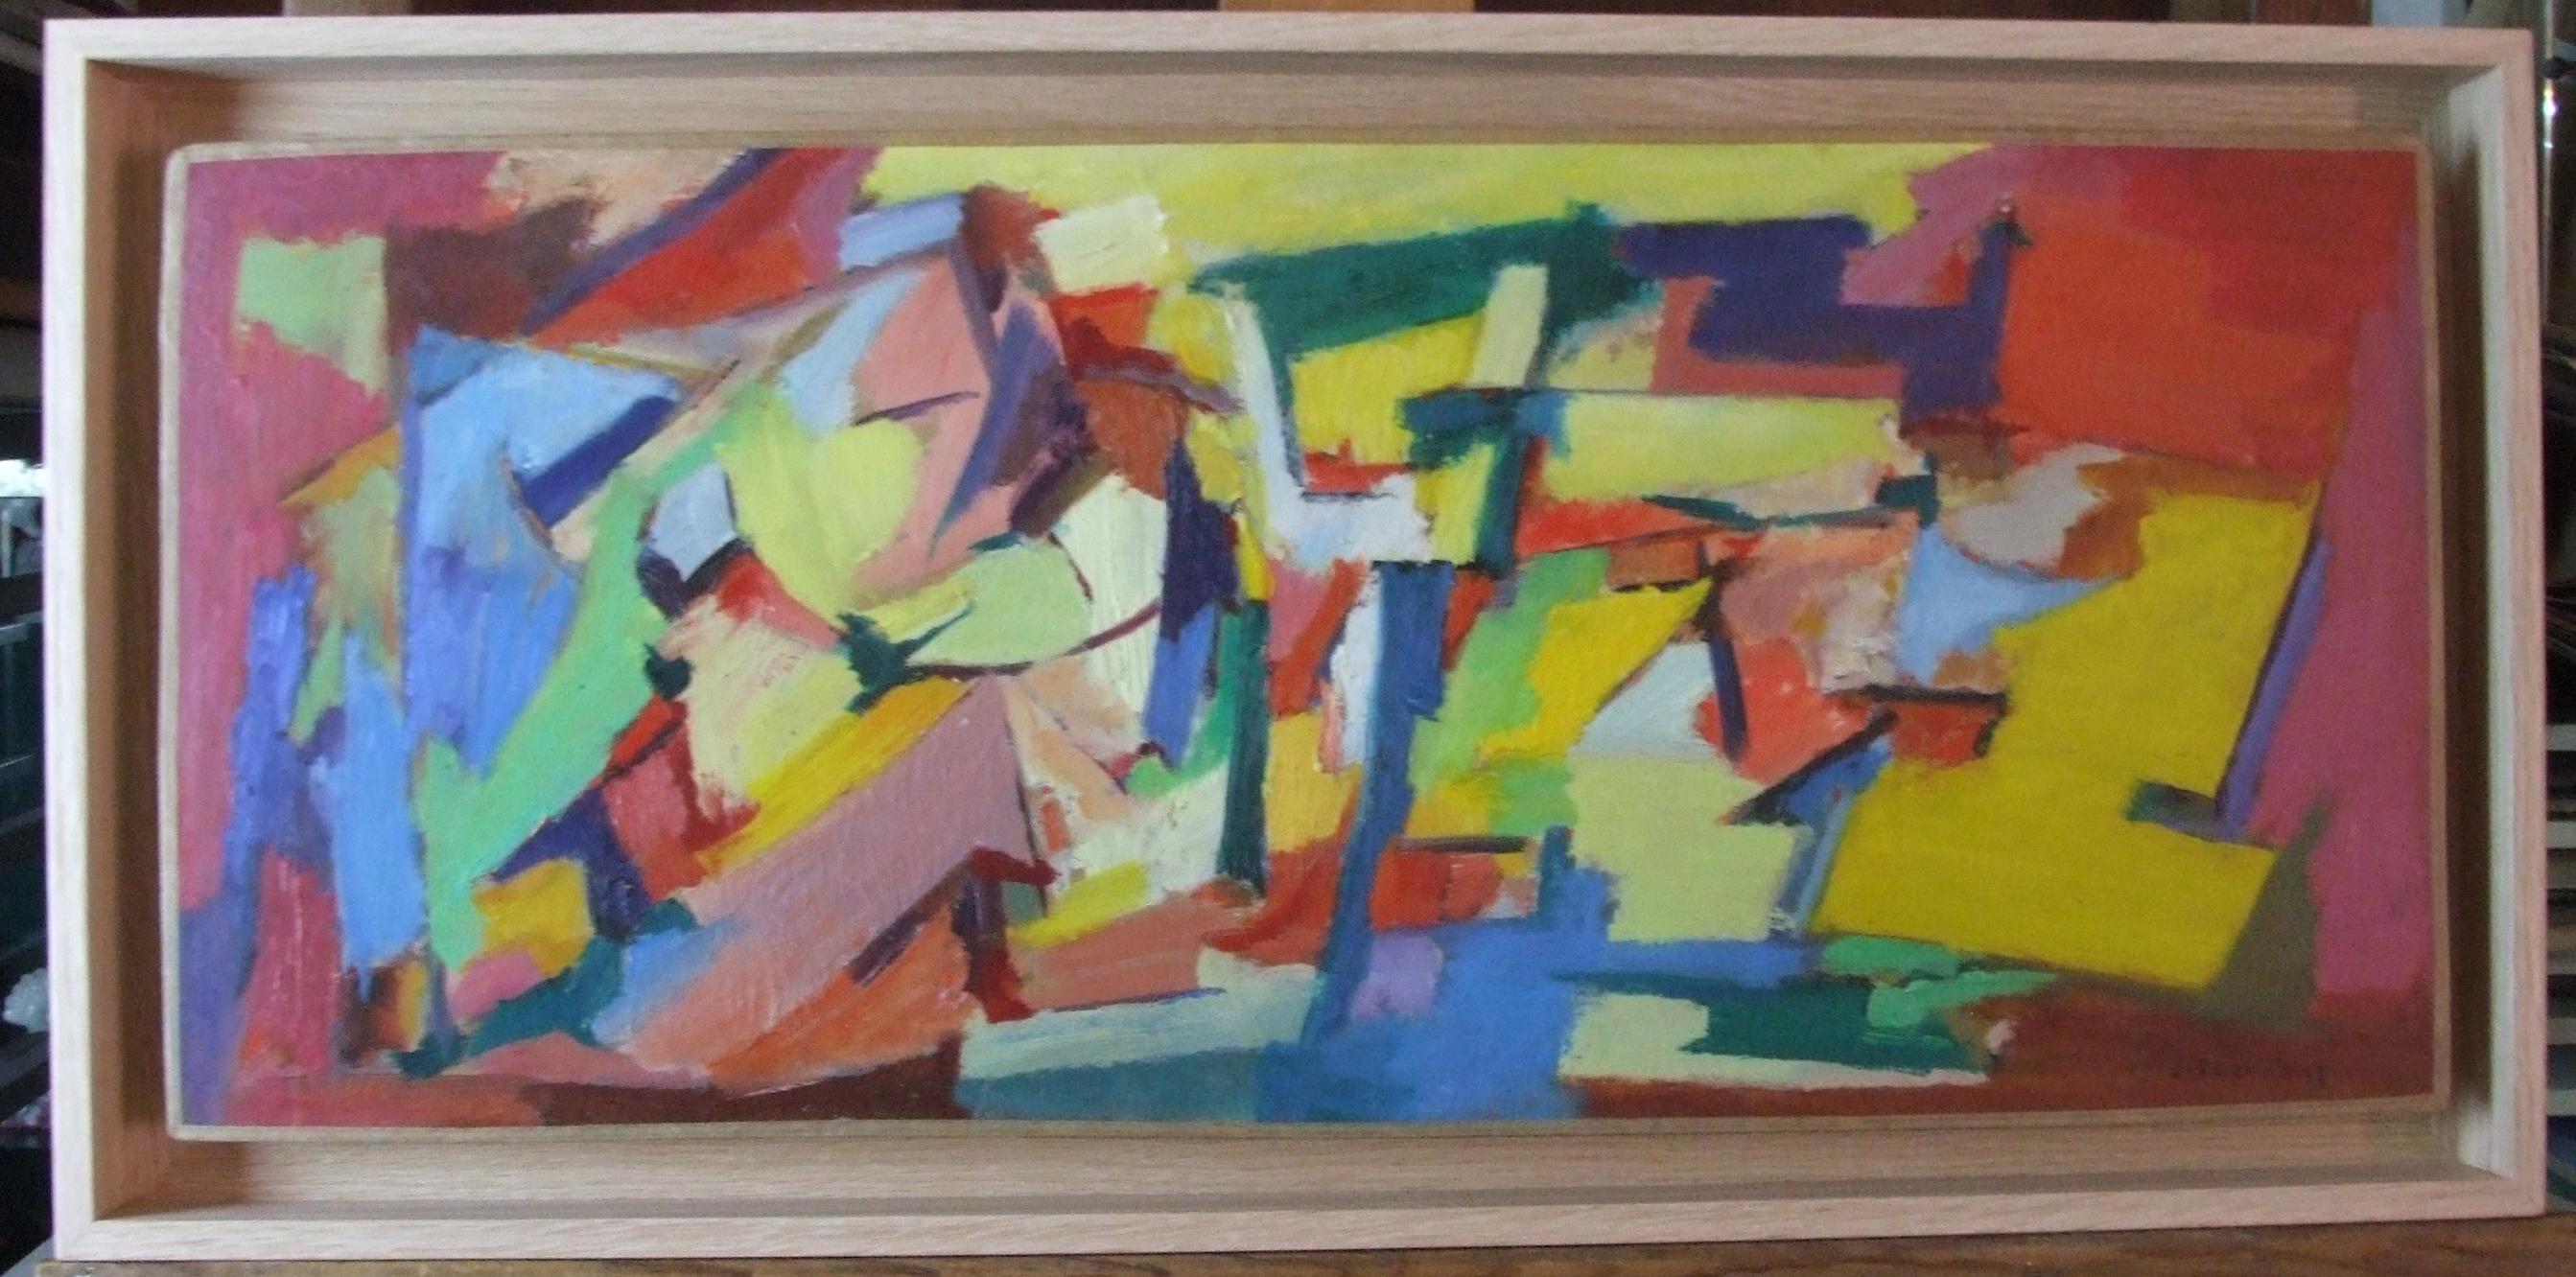 Jean Deyrolle Abstract Painting - composition I, 1963 - Oil on canvas, 25x59 cm, framed.